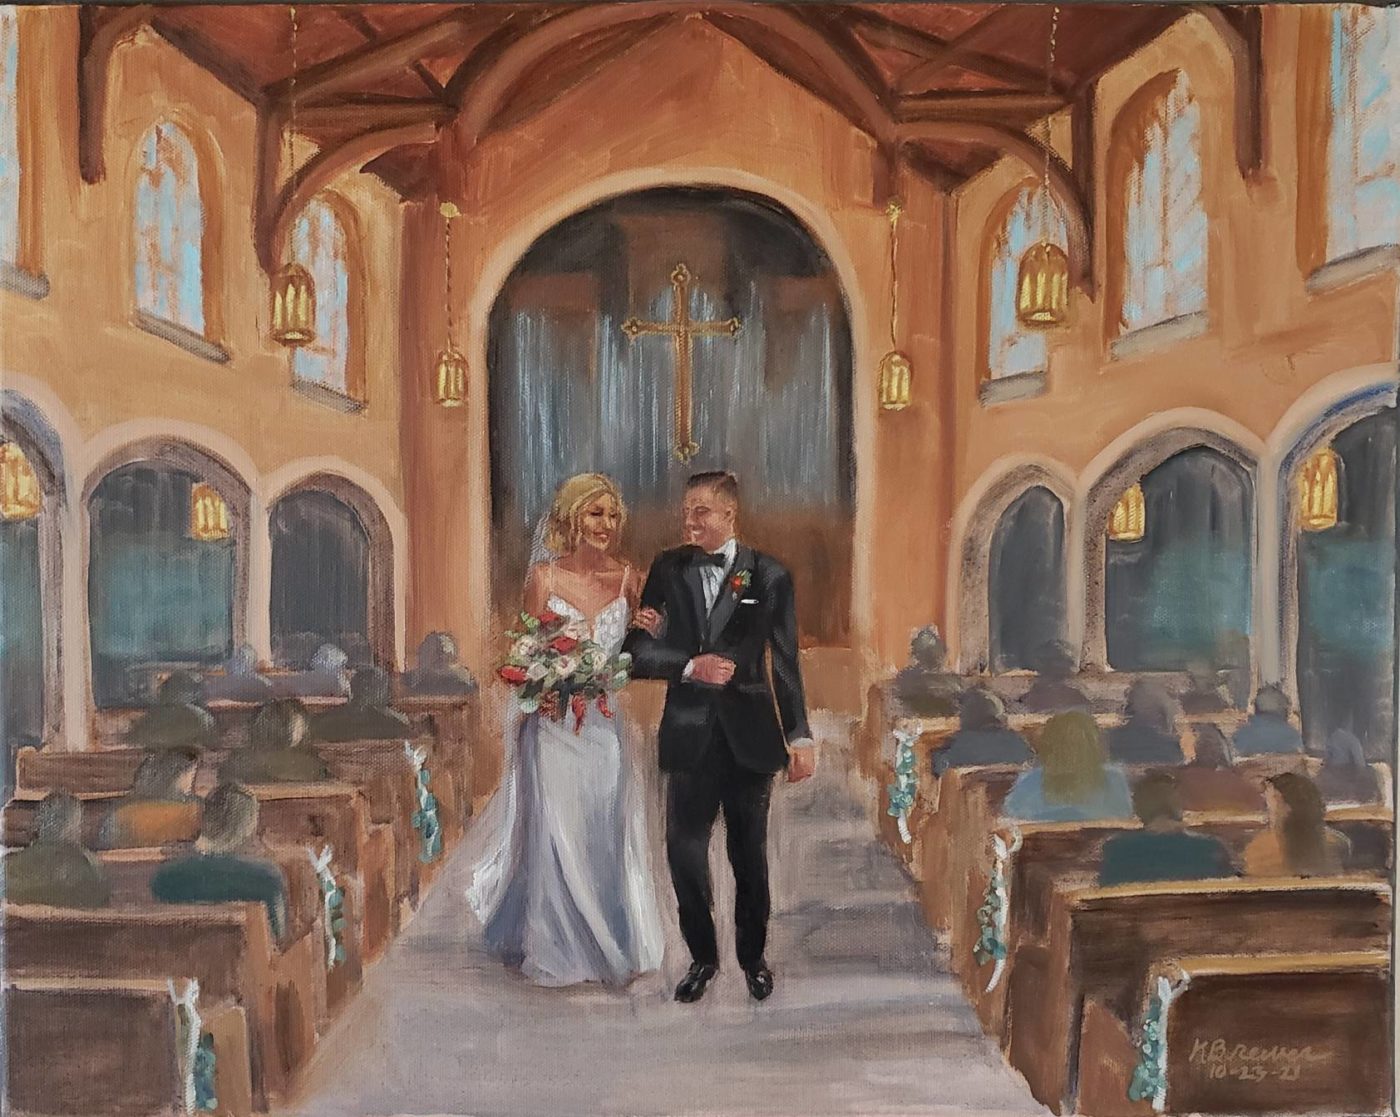 Live wedding painting: the booking process